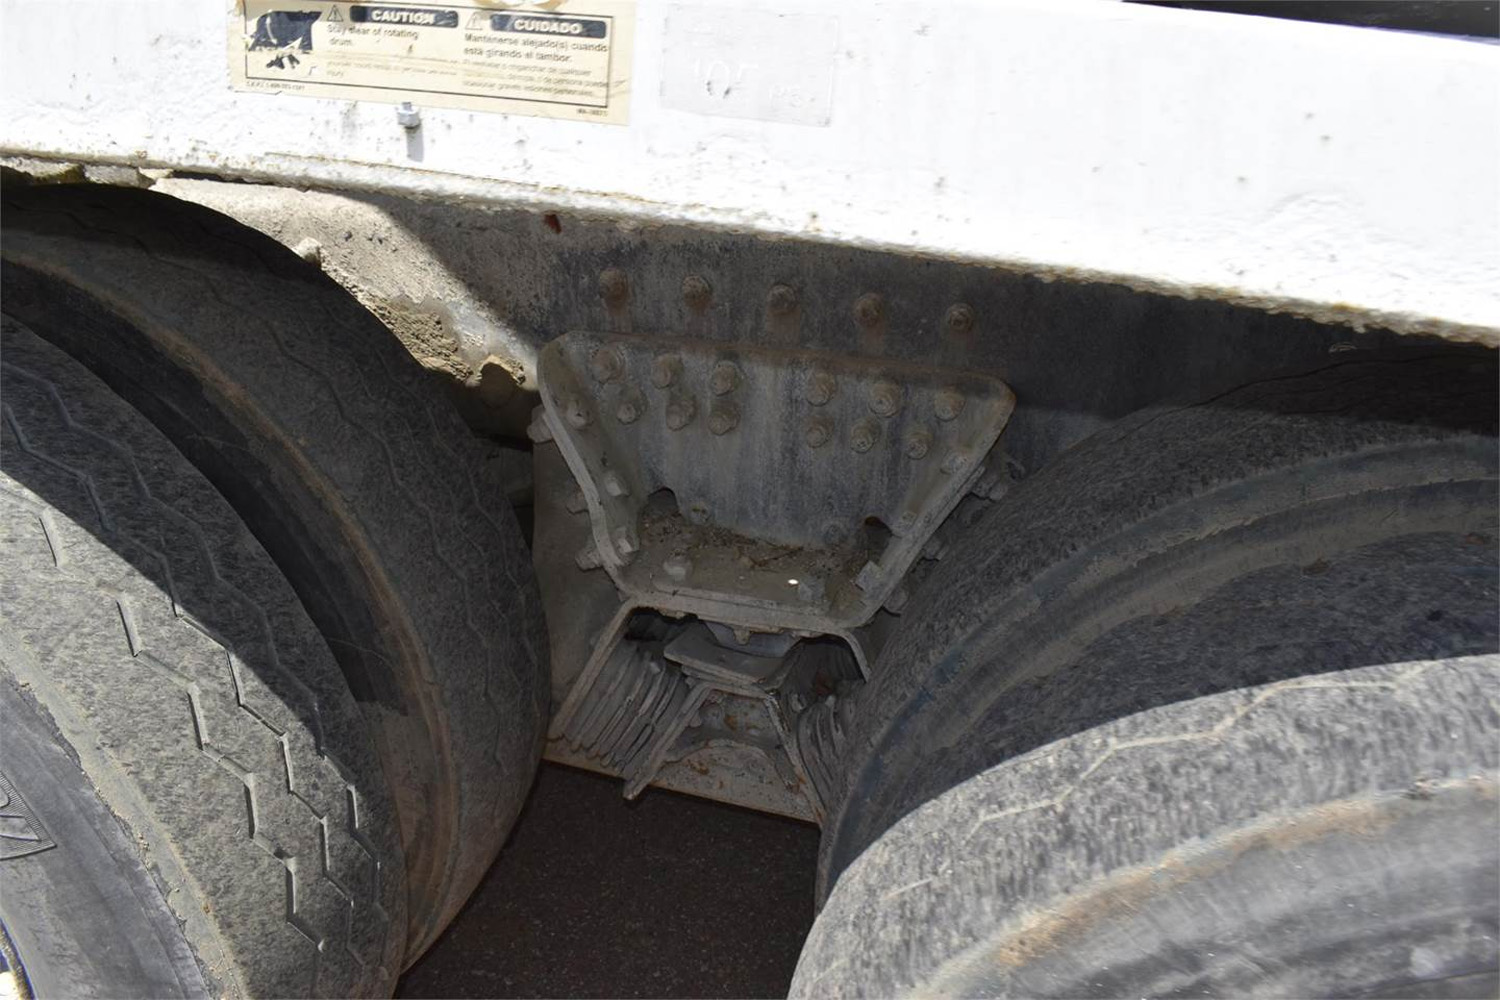 Closeup pic of a concrete truck's heavy duty frame